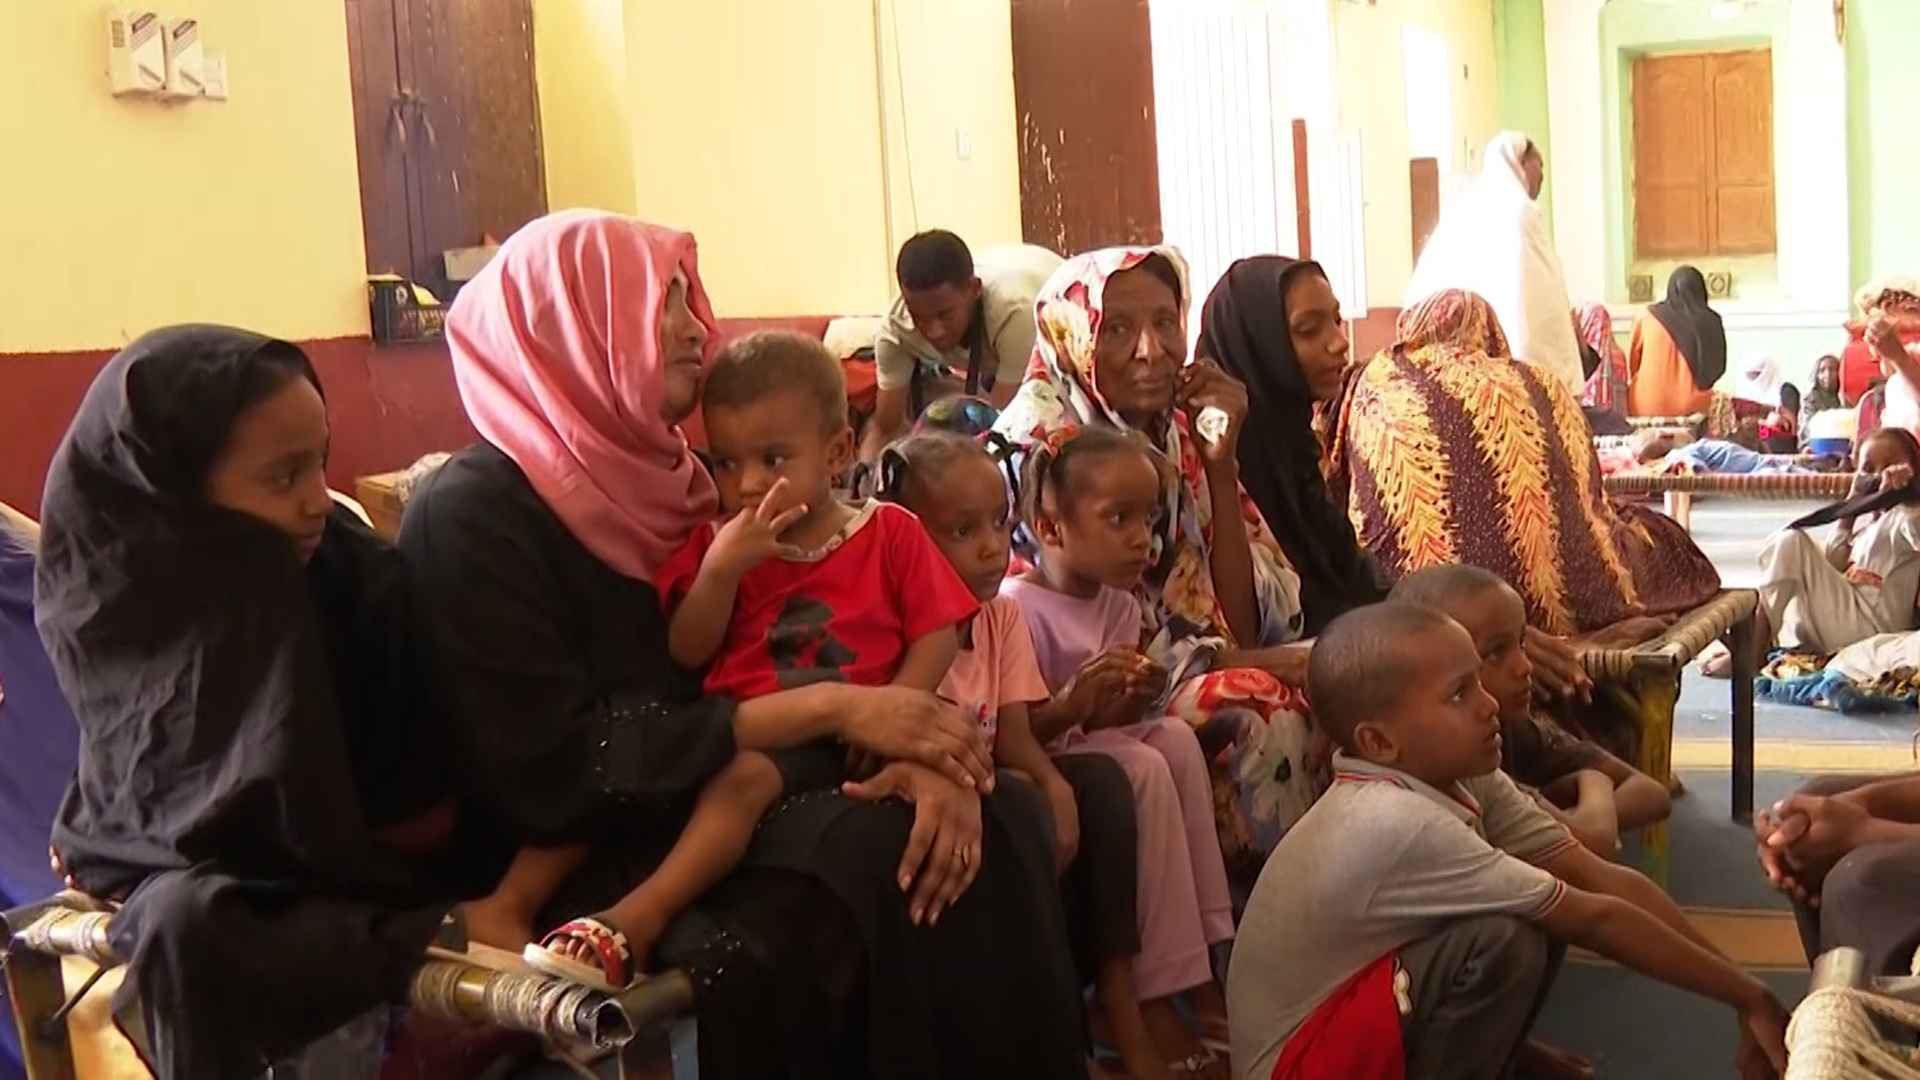 Why exacerbated the suffering of the Sudanese stranded on the border with Egypt?